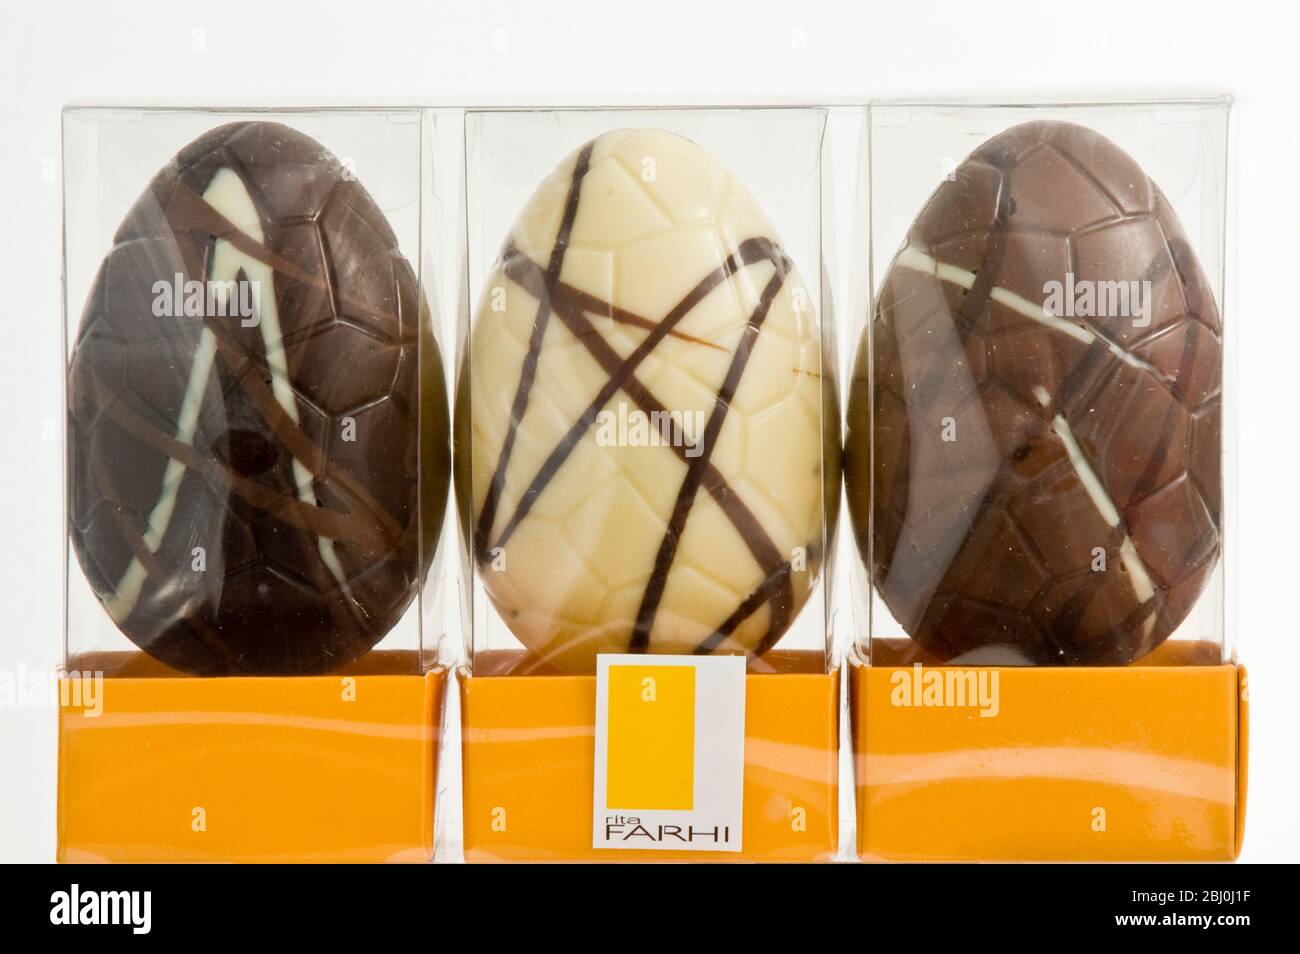 Three similar chocolate Easter eggs - plain, whie and milk chocolate, in cellophane boxes. - Stock Photo